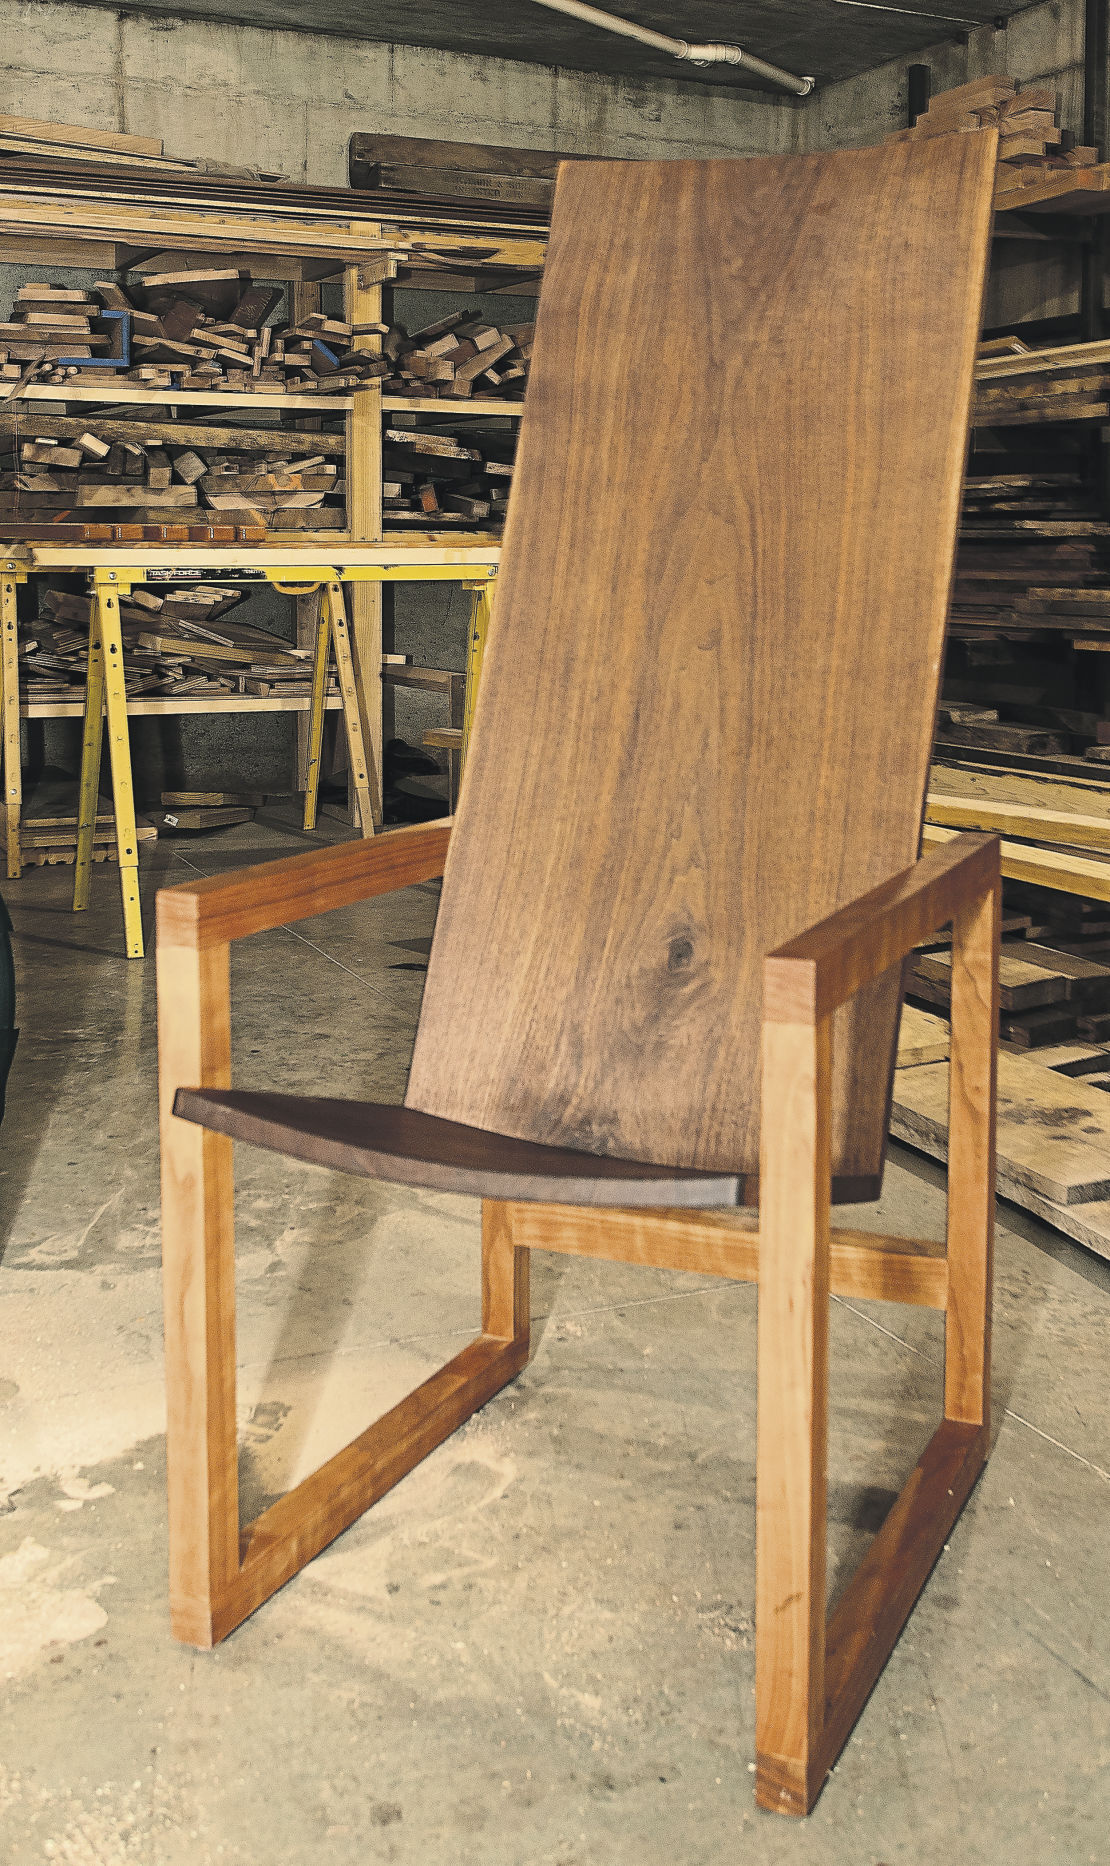 A chair constructed of maple and cherry.    PHOTO CREDIT: Stephen Gassman